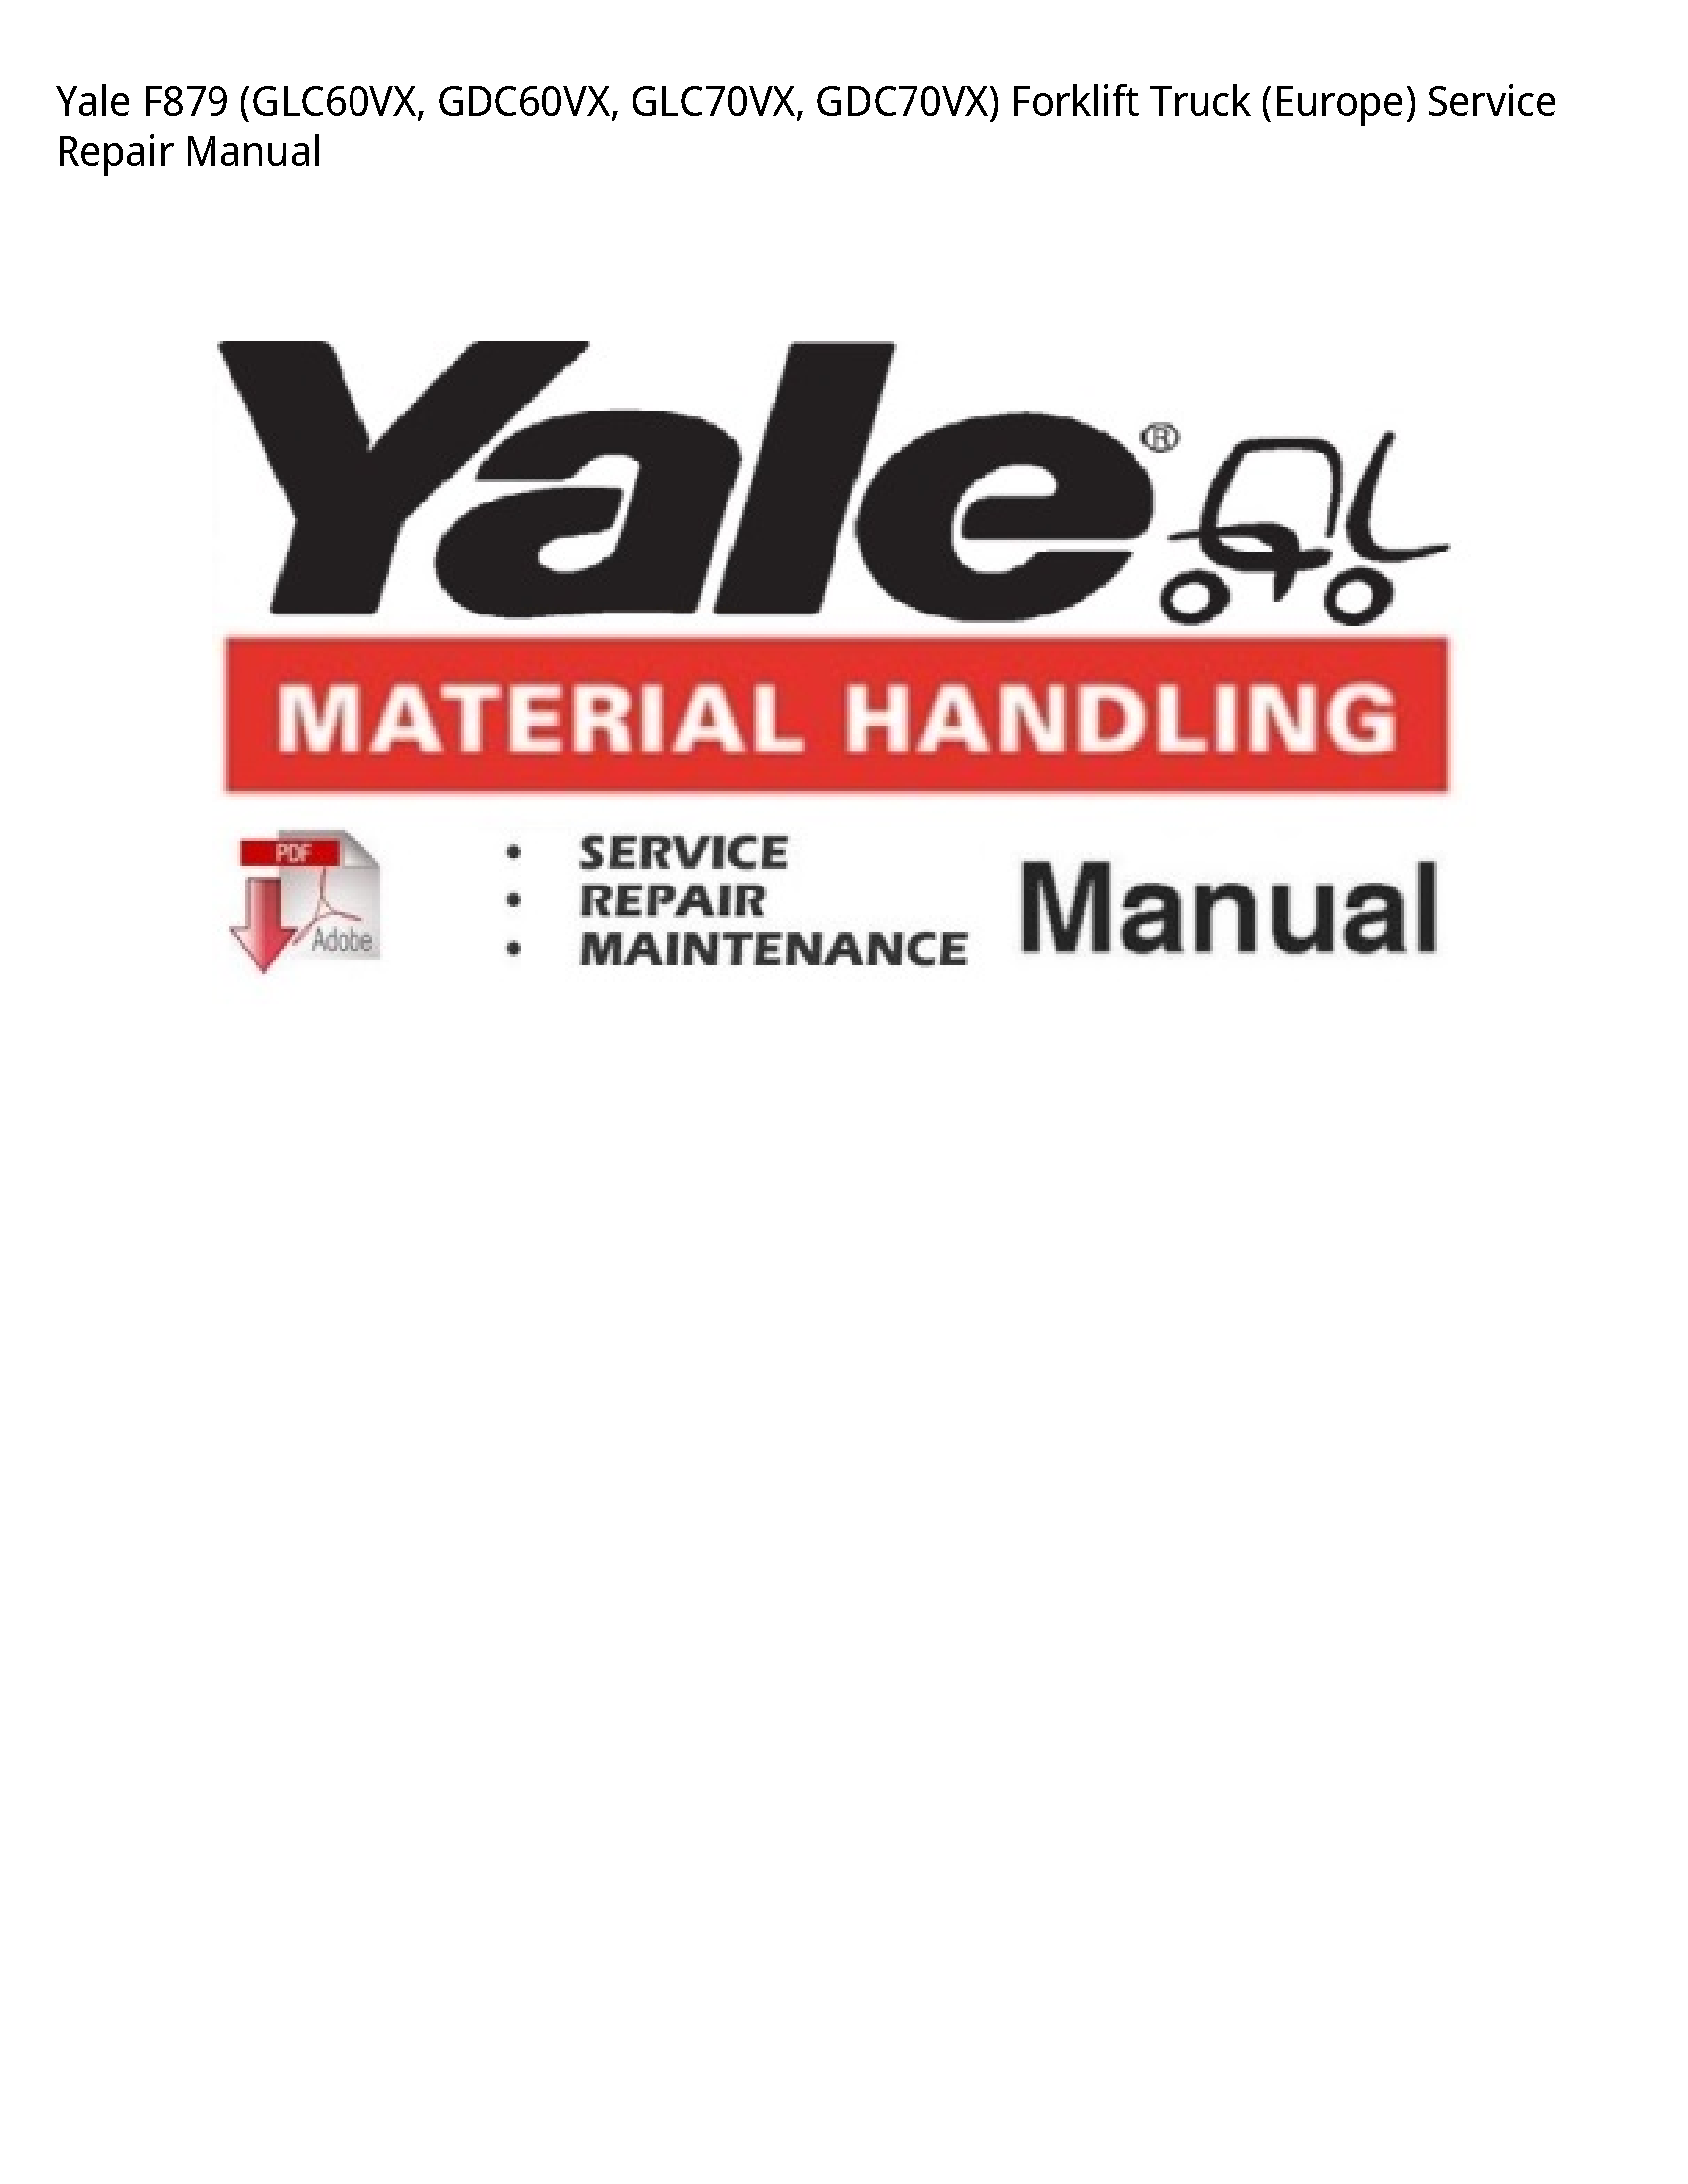 Yale F879 Forklift Truck (Europe) manual